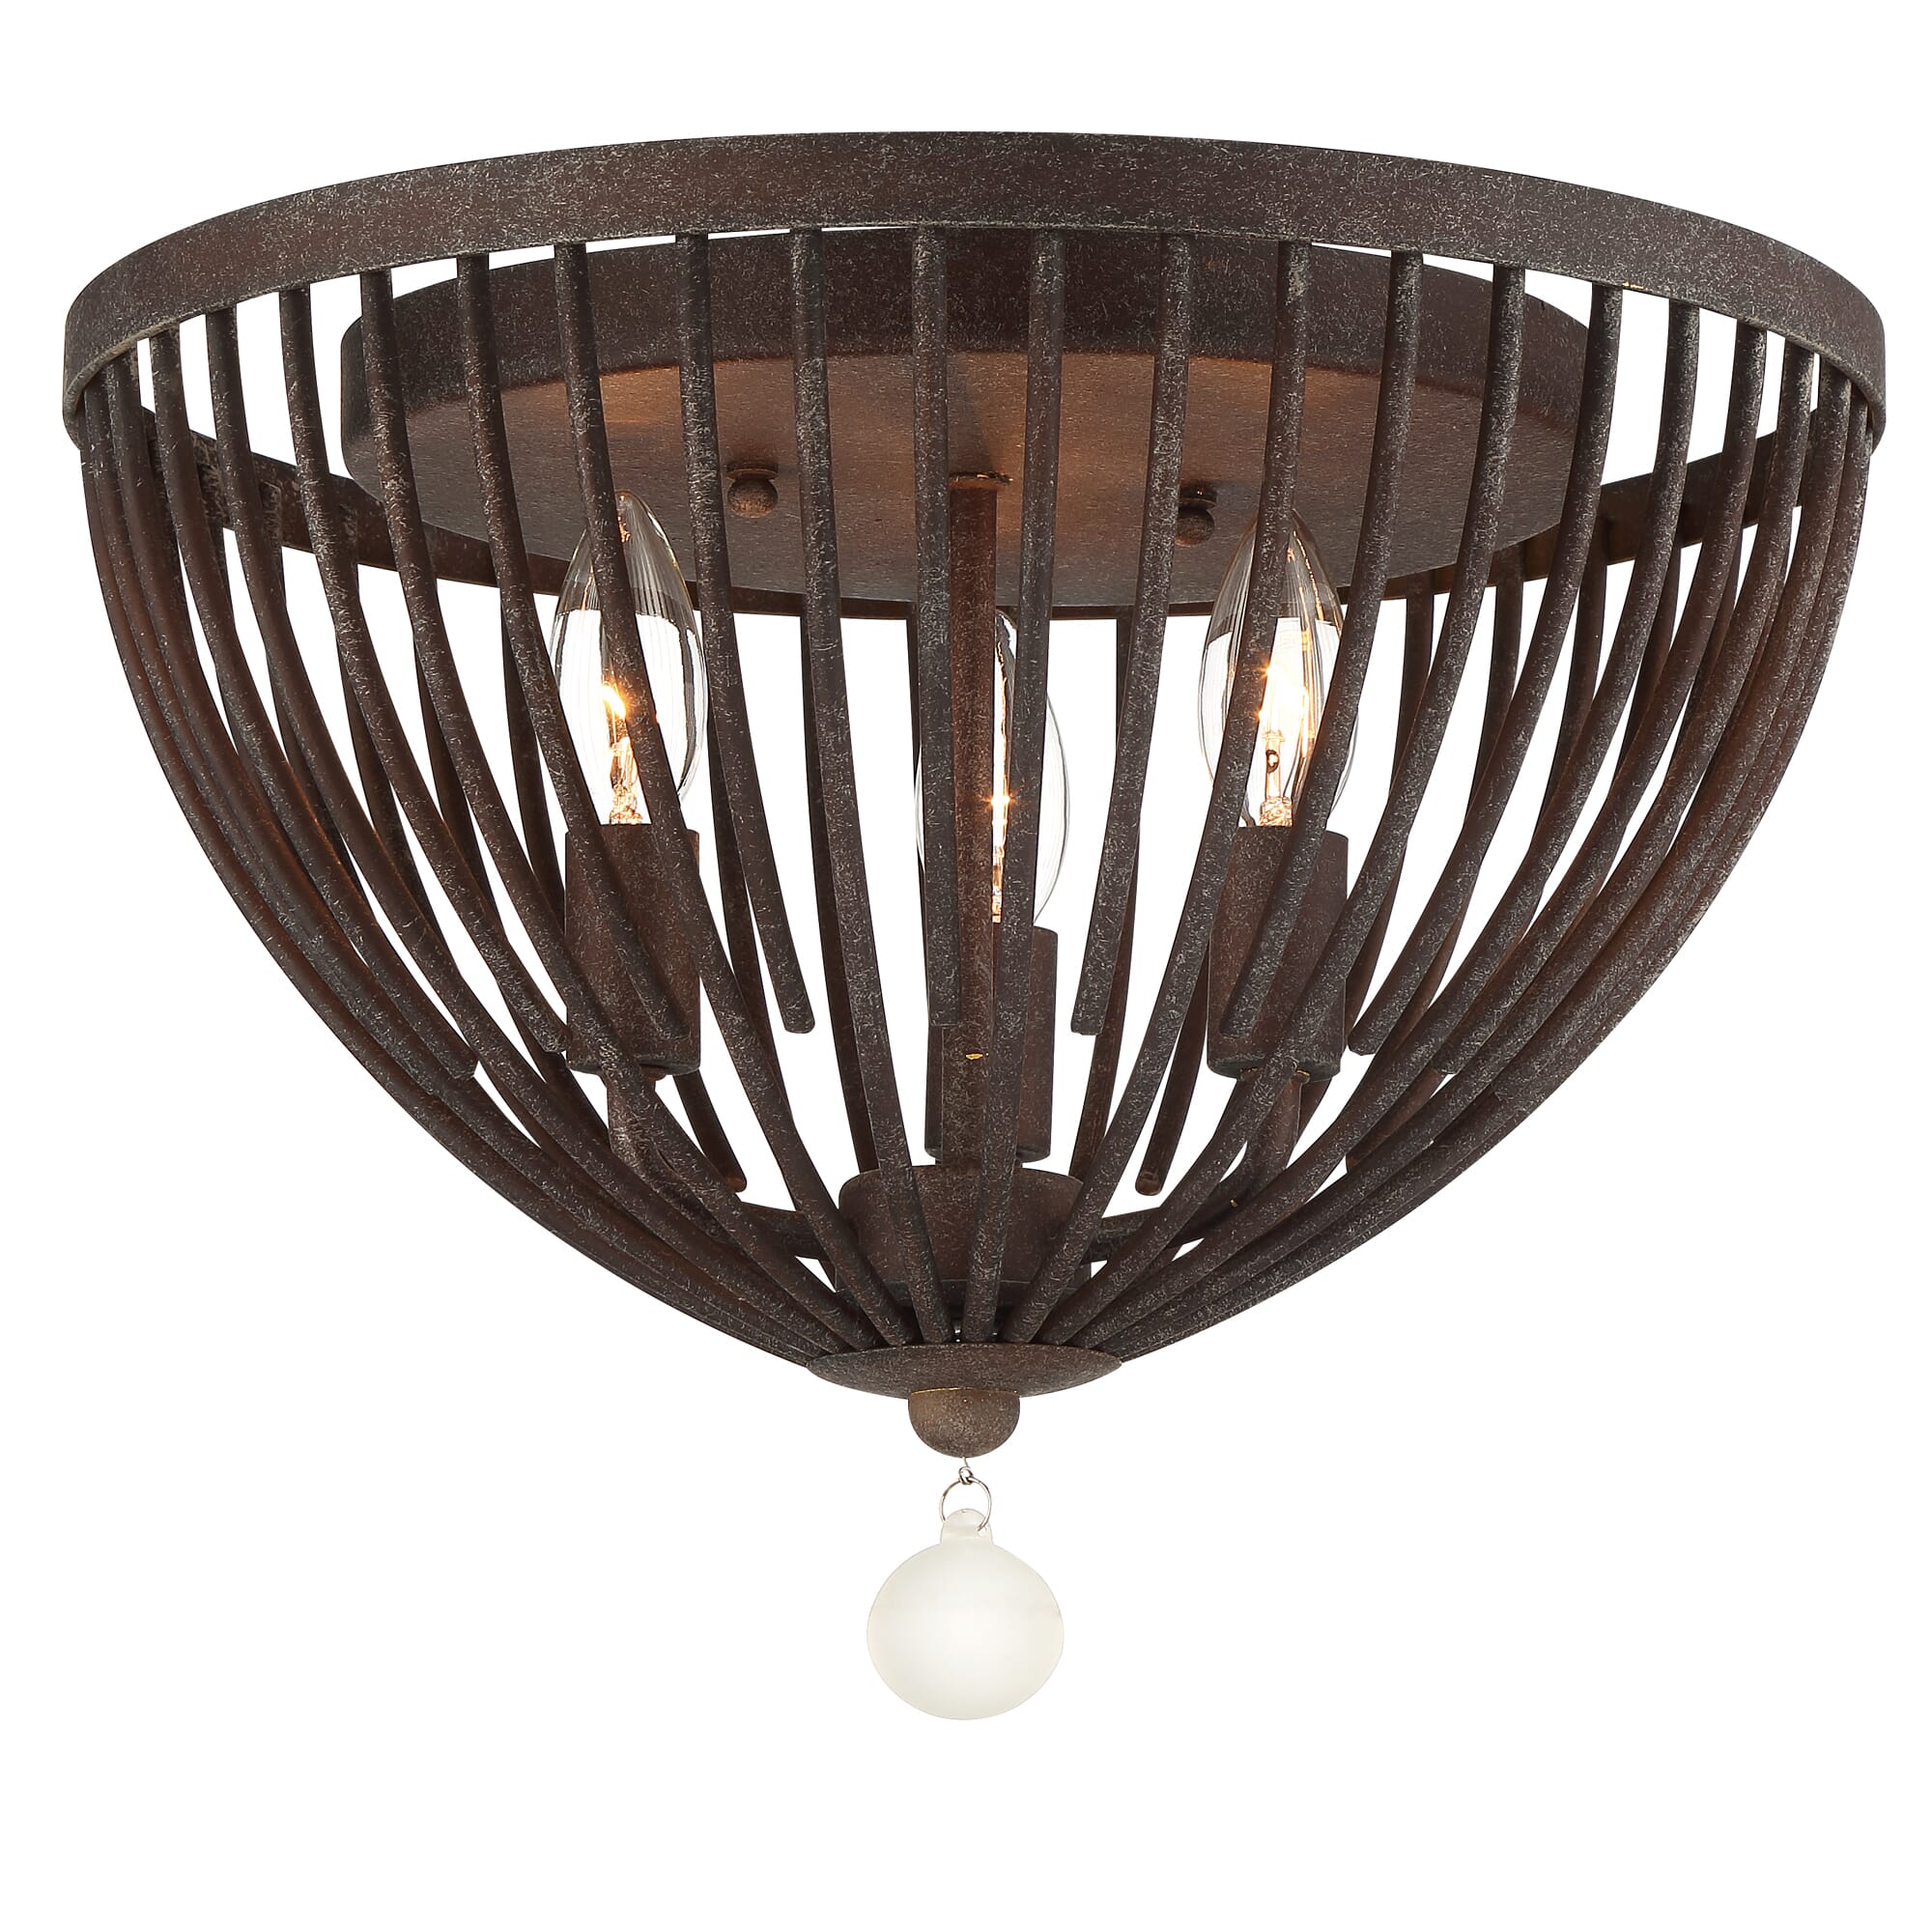 Crystorama Duval 3-Light Ceiling Light in Forged Bronze